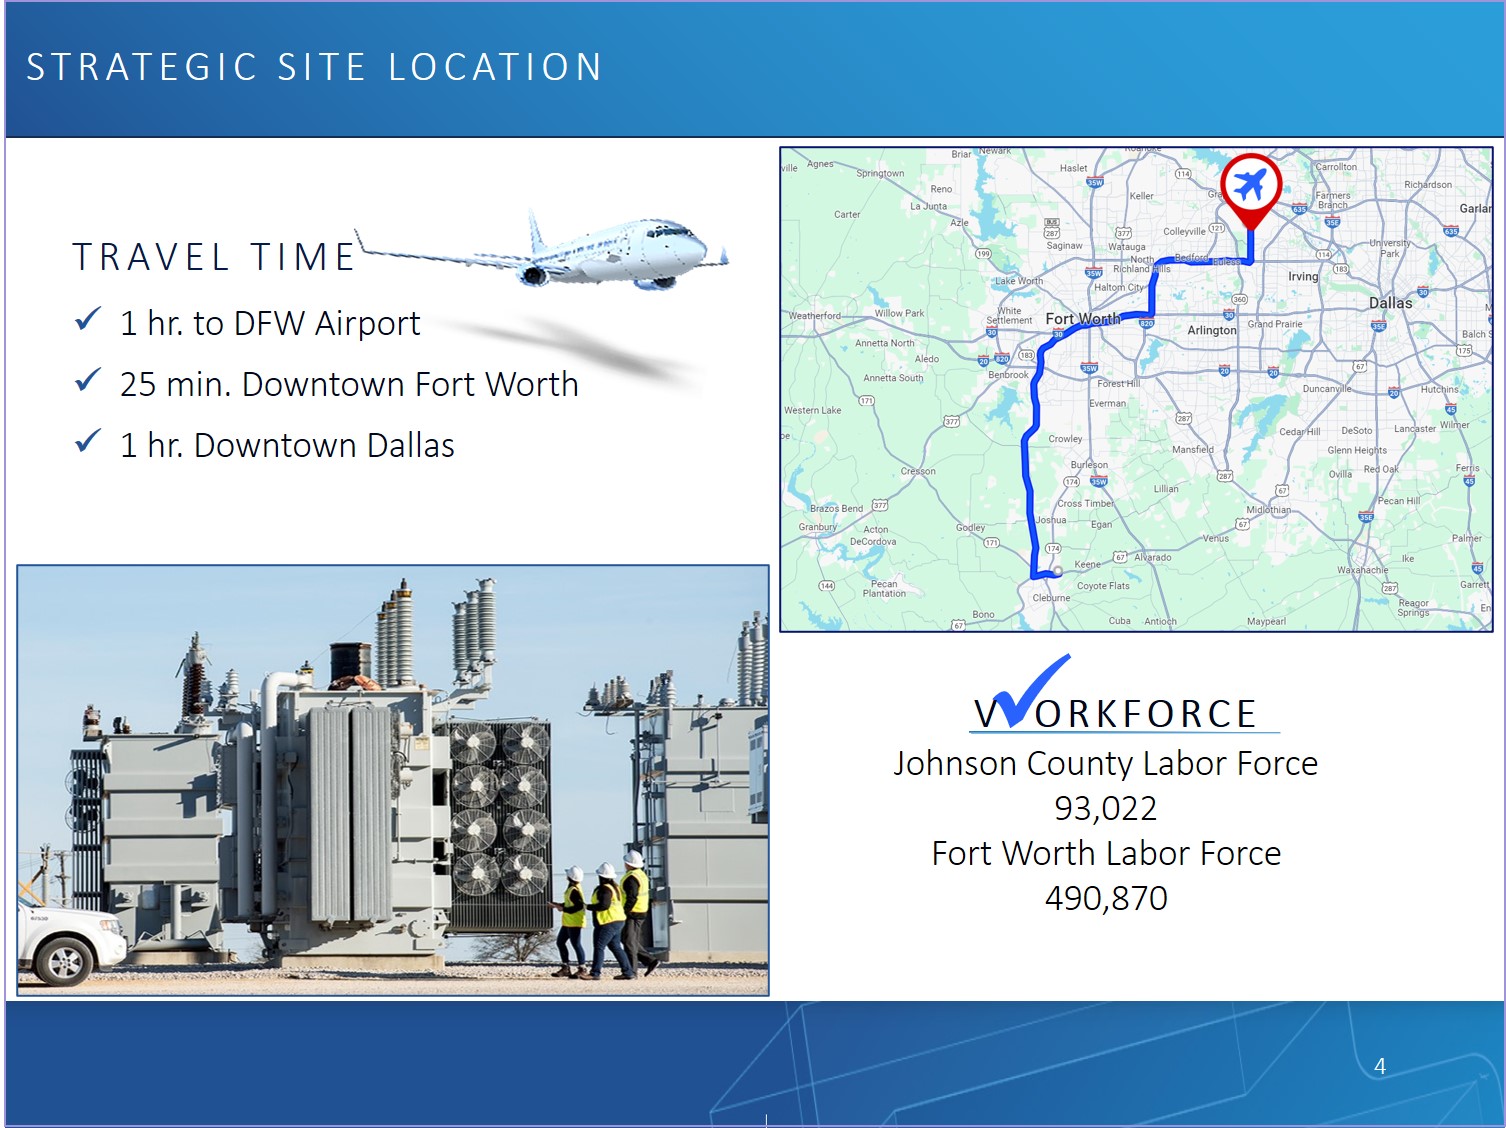 Industrial Data Center Land 30 minutes from airport with large workforce.